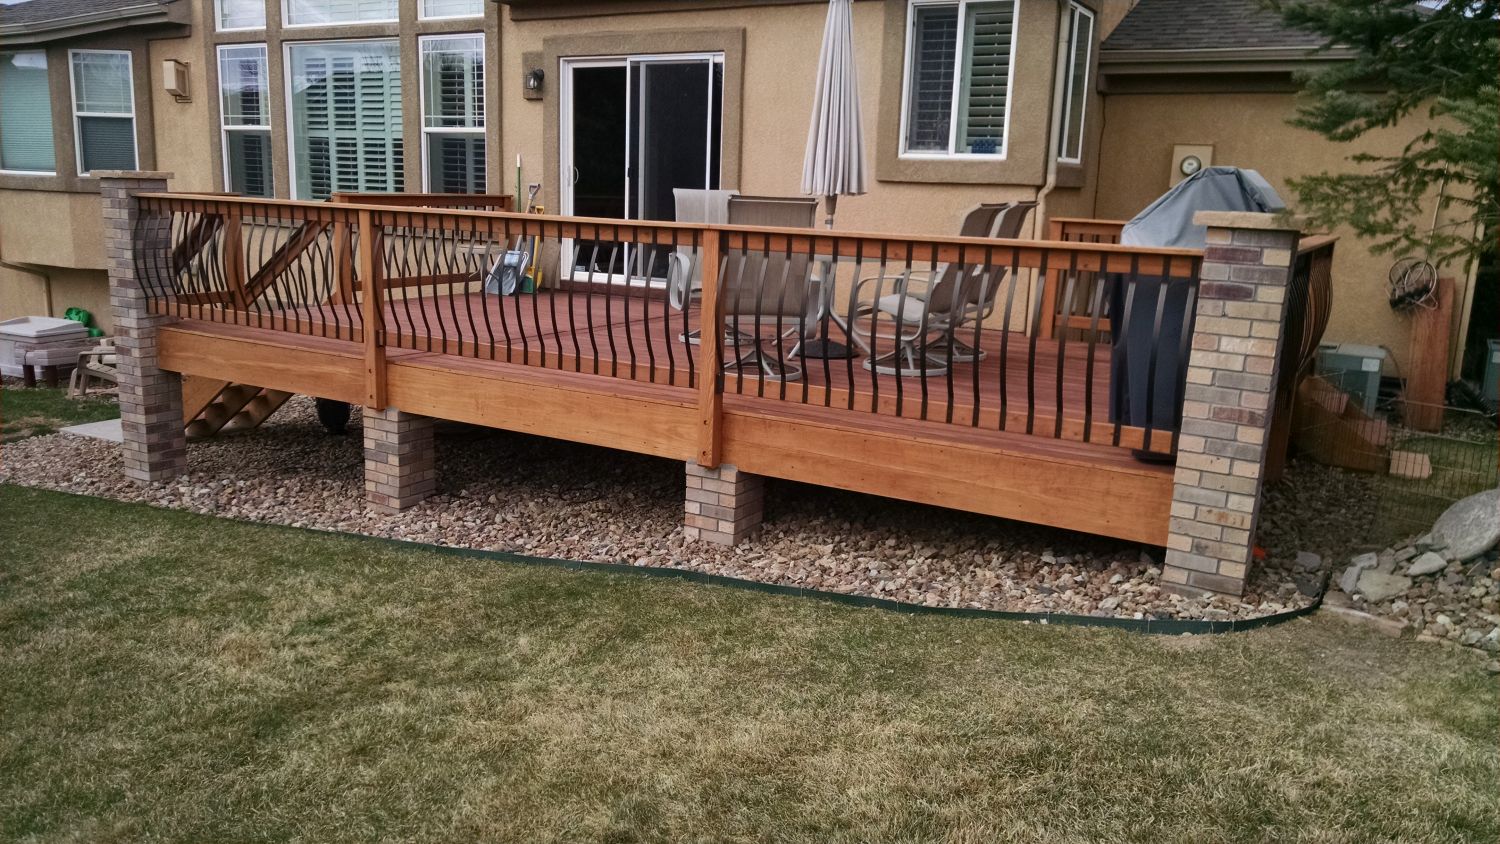 Redwood components railing with black metal Vienna-style balusters, anchored by stone columns.